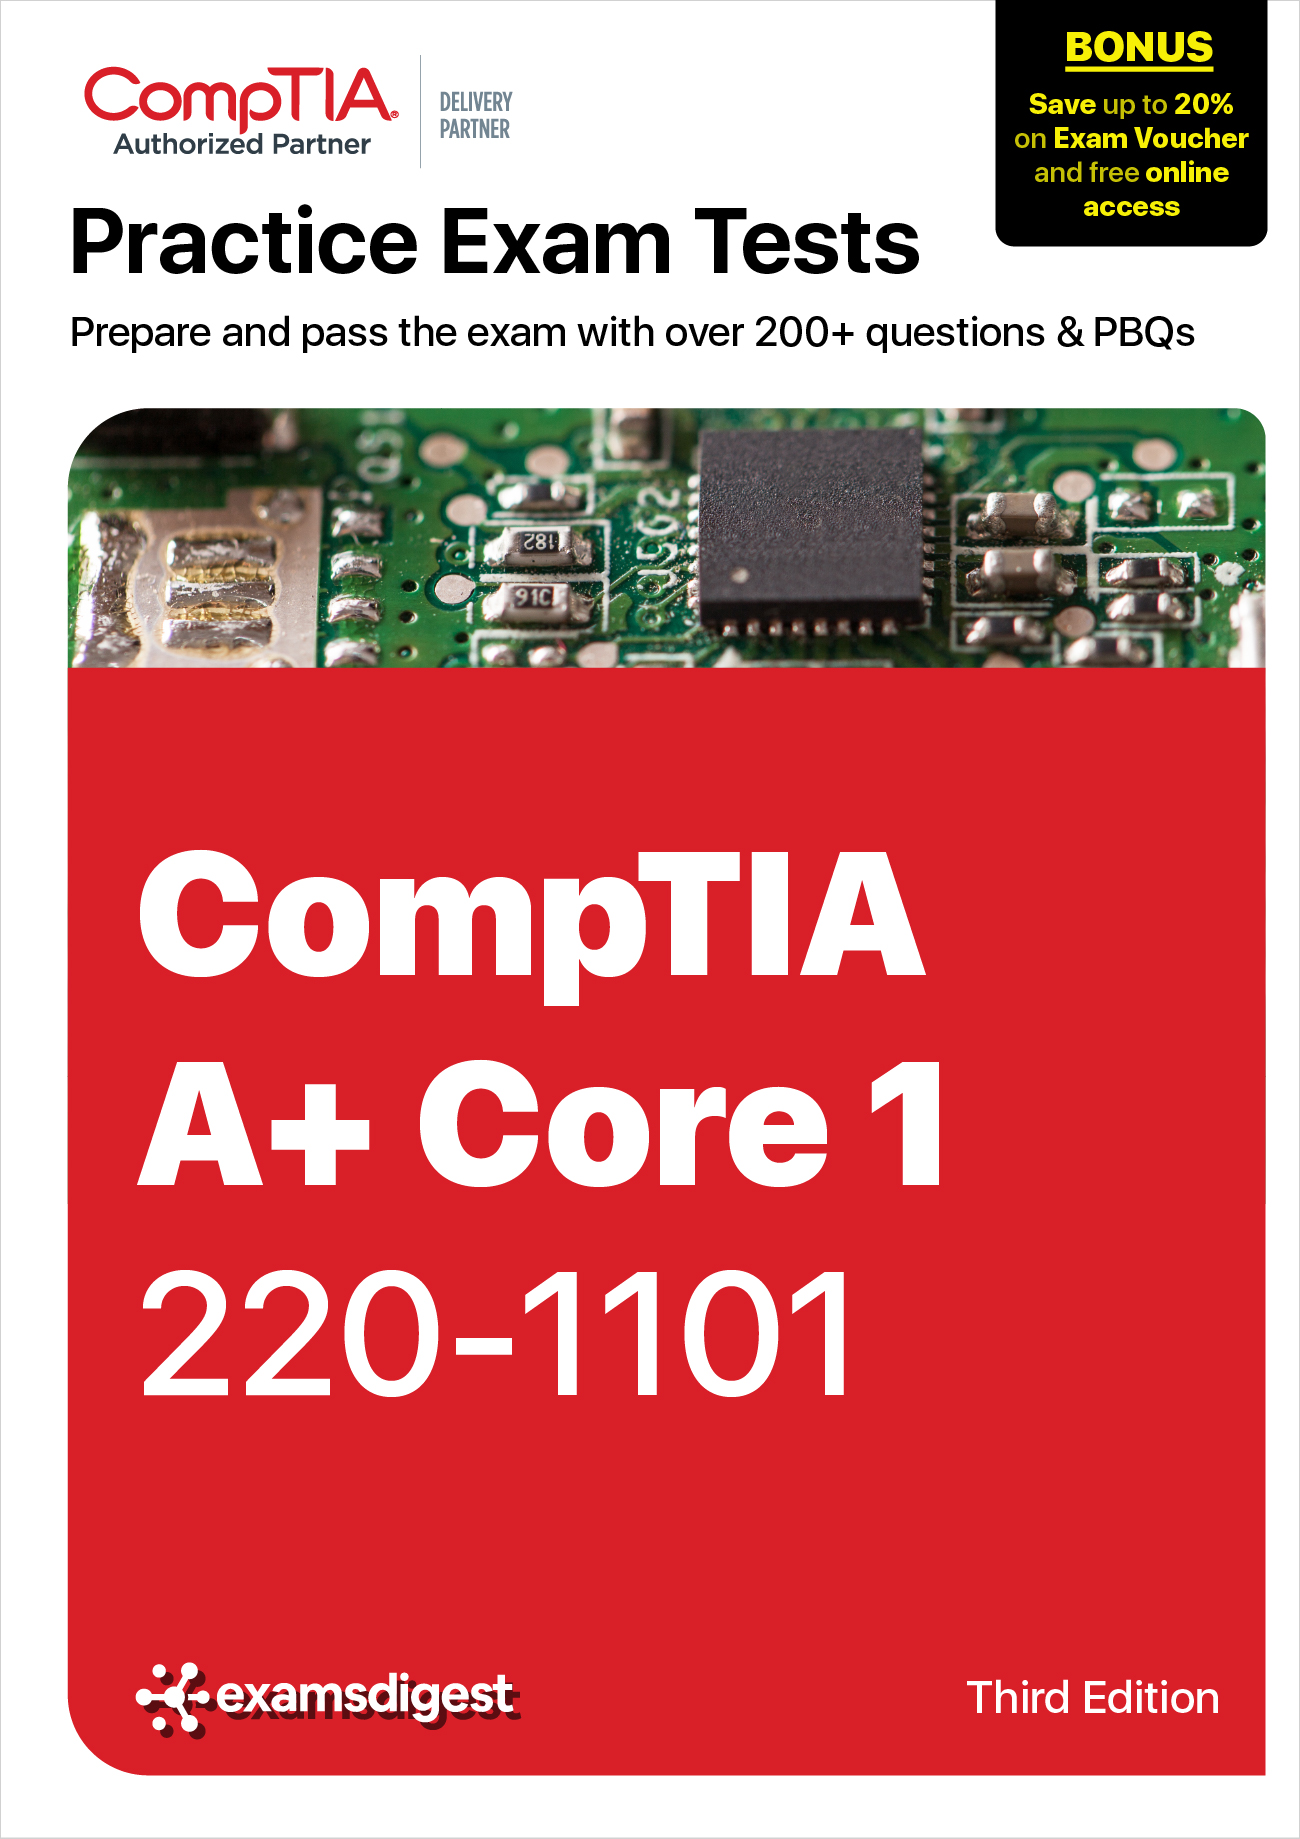 CompTIA A+ 220-1101-Practice Exam Questions Study Guide